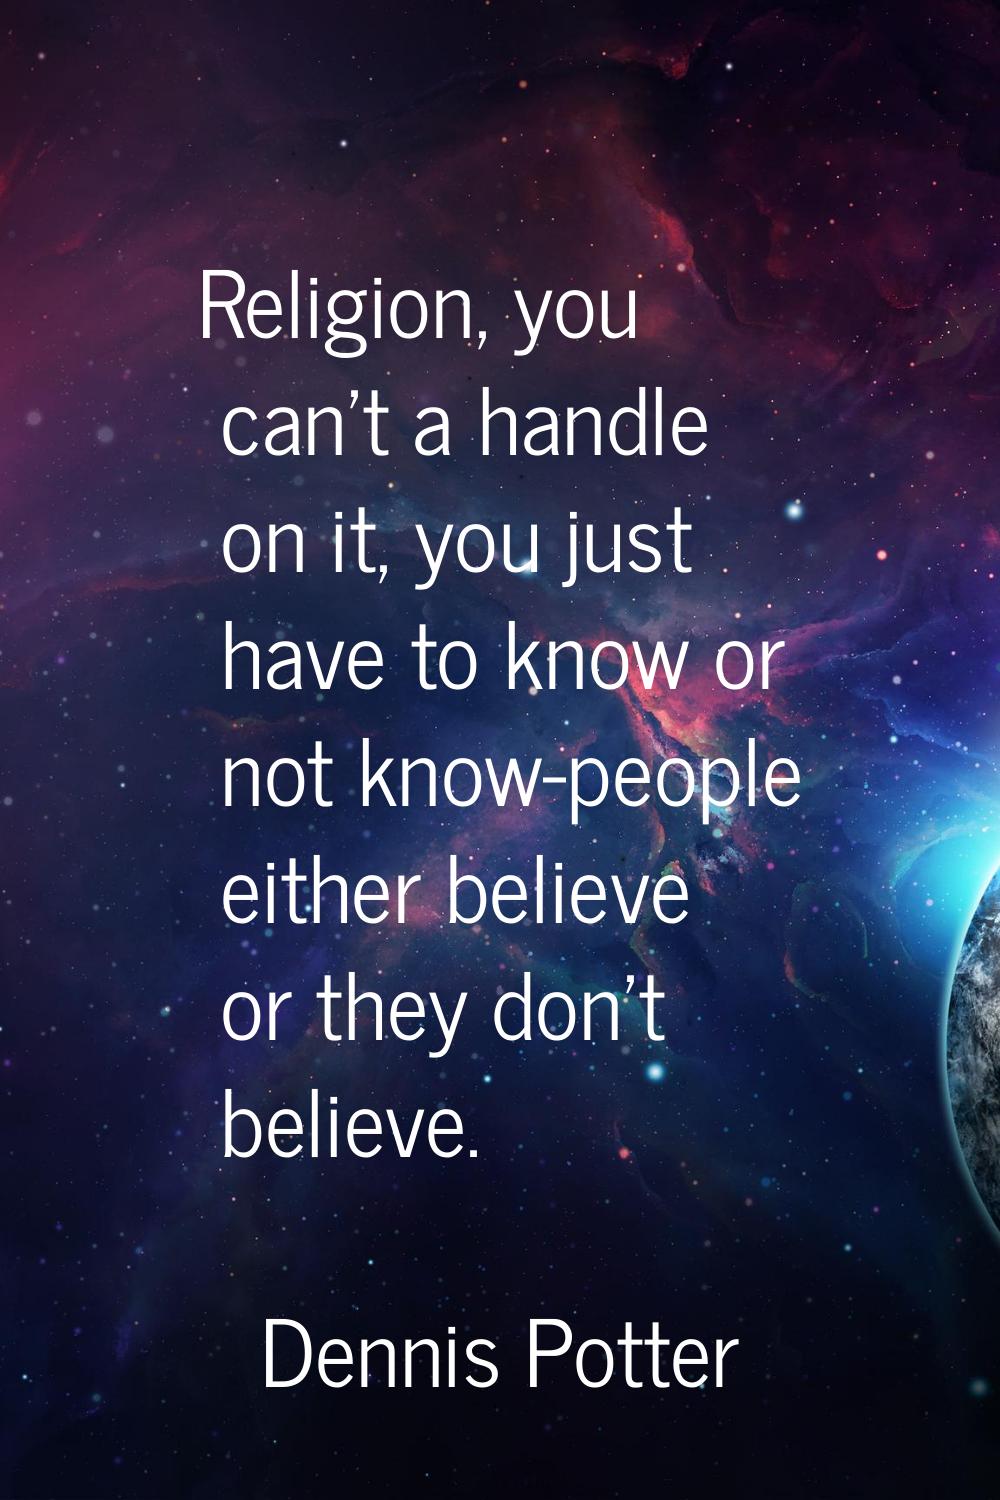 Religion, you can't a handle on it, you just have to know or not know-people either believe or they